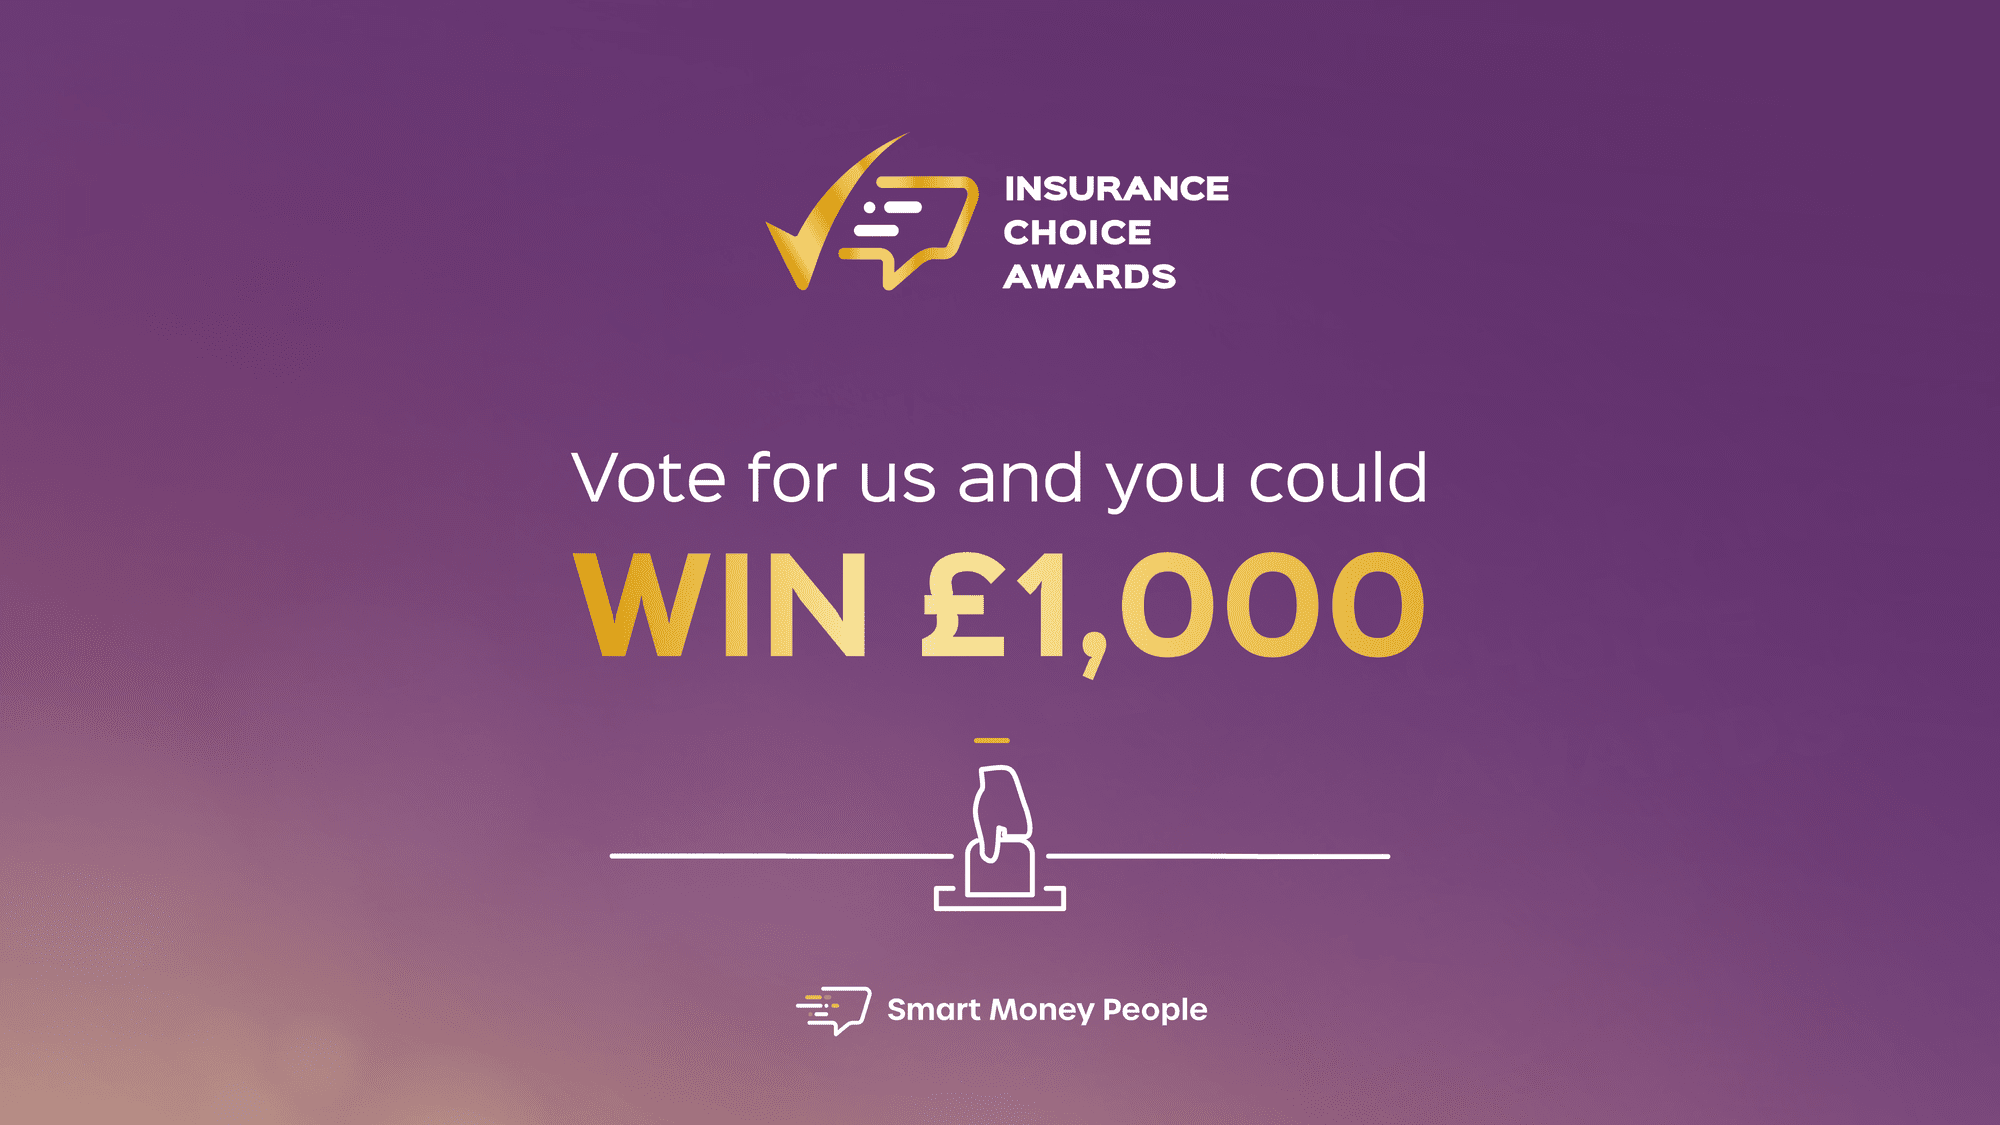 Vote now and you could win £1,000 - Insurance Choice Awards 2022